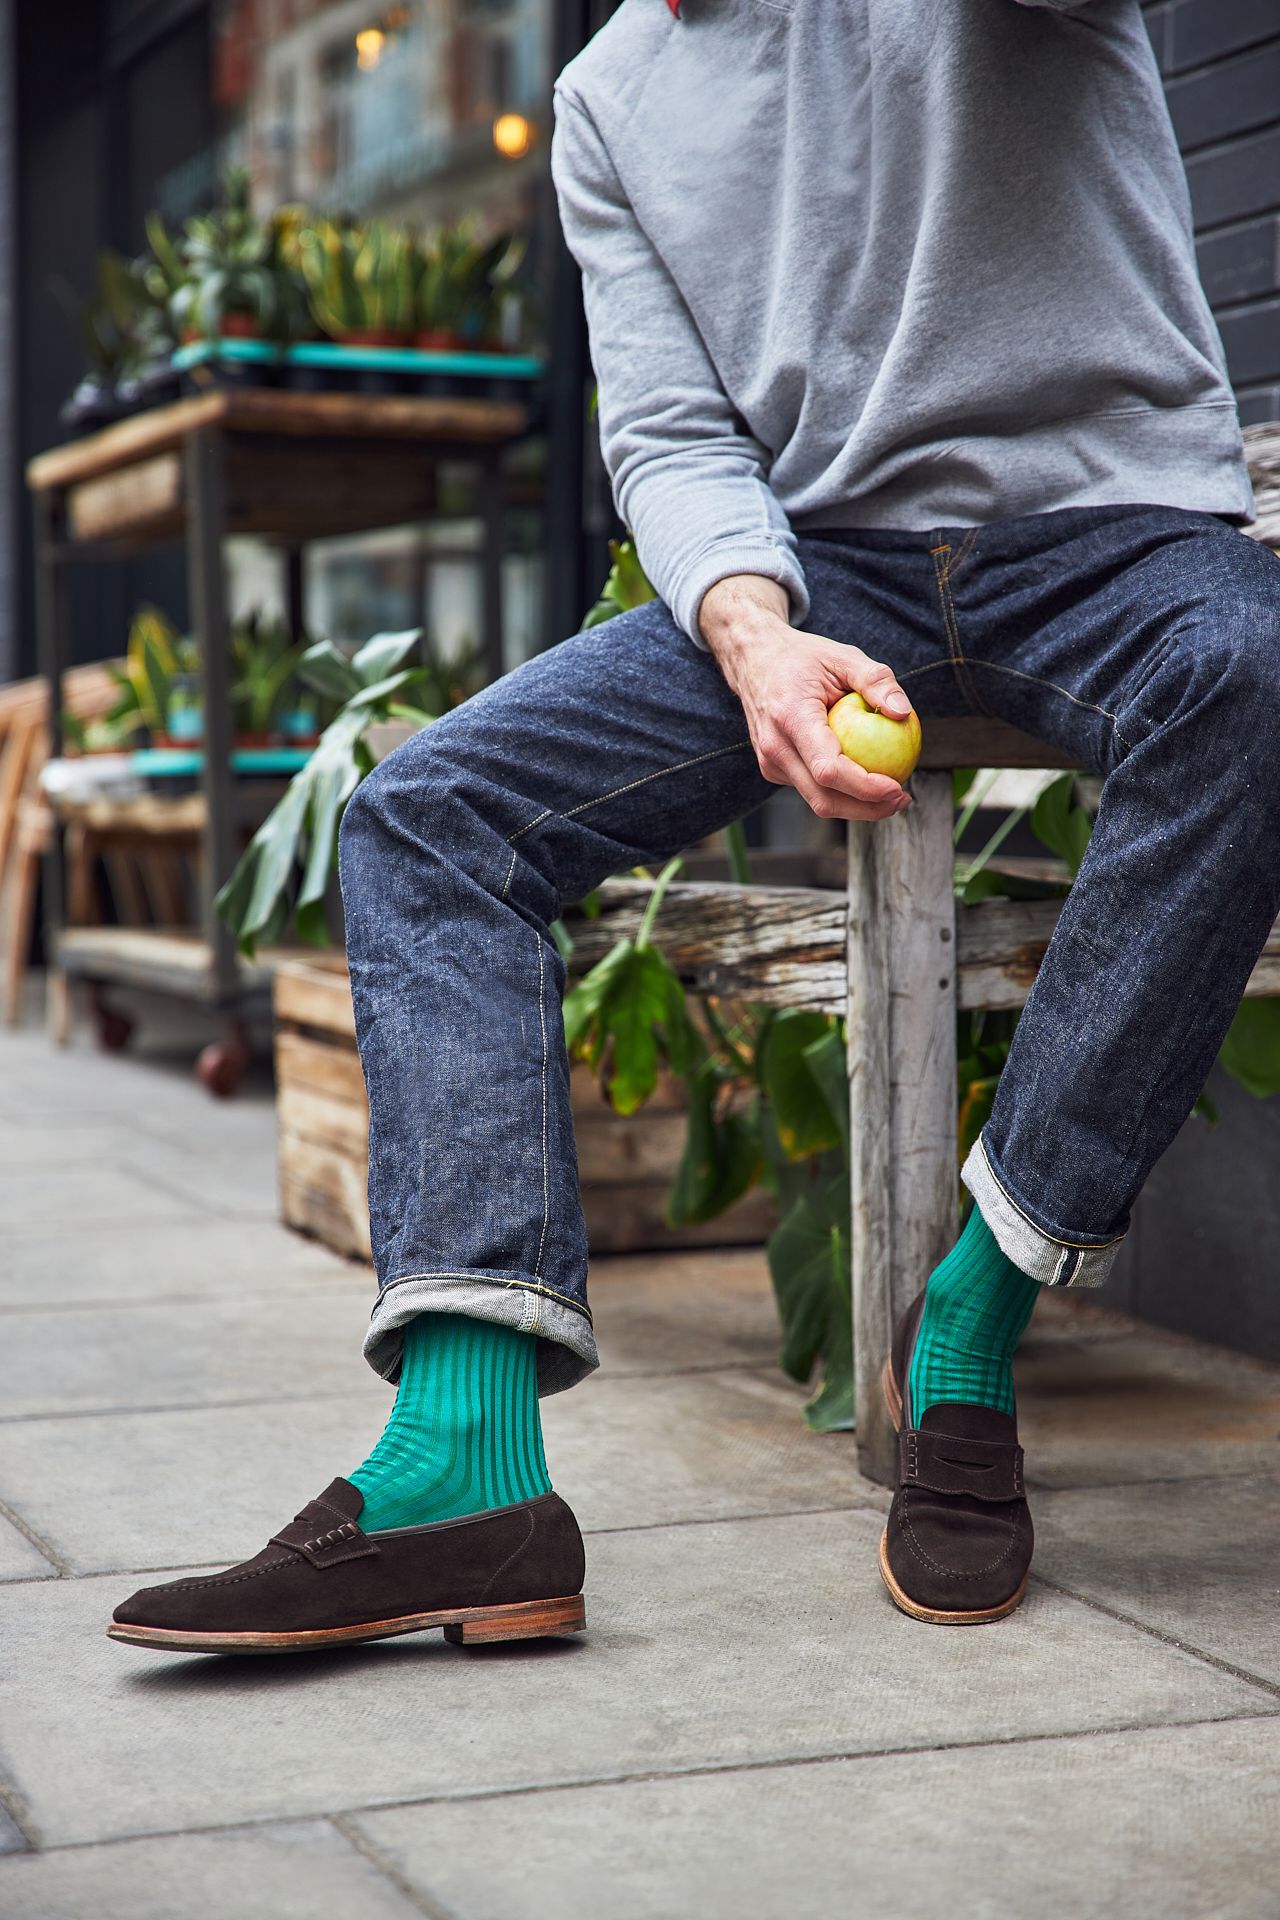 Men’s Style Tips: Styling socks with jeans